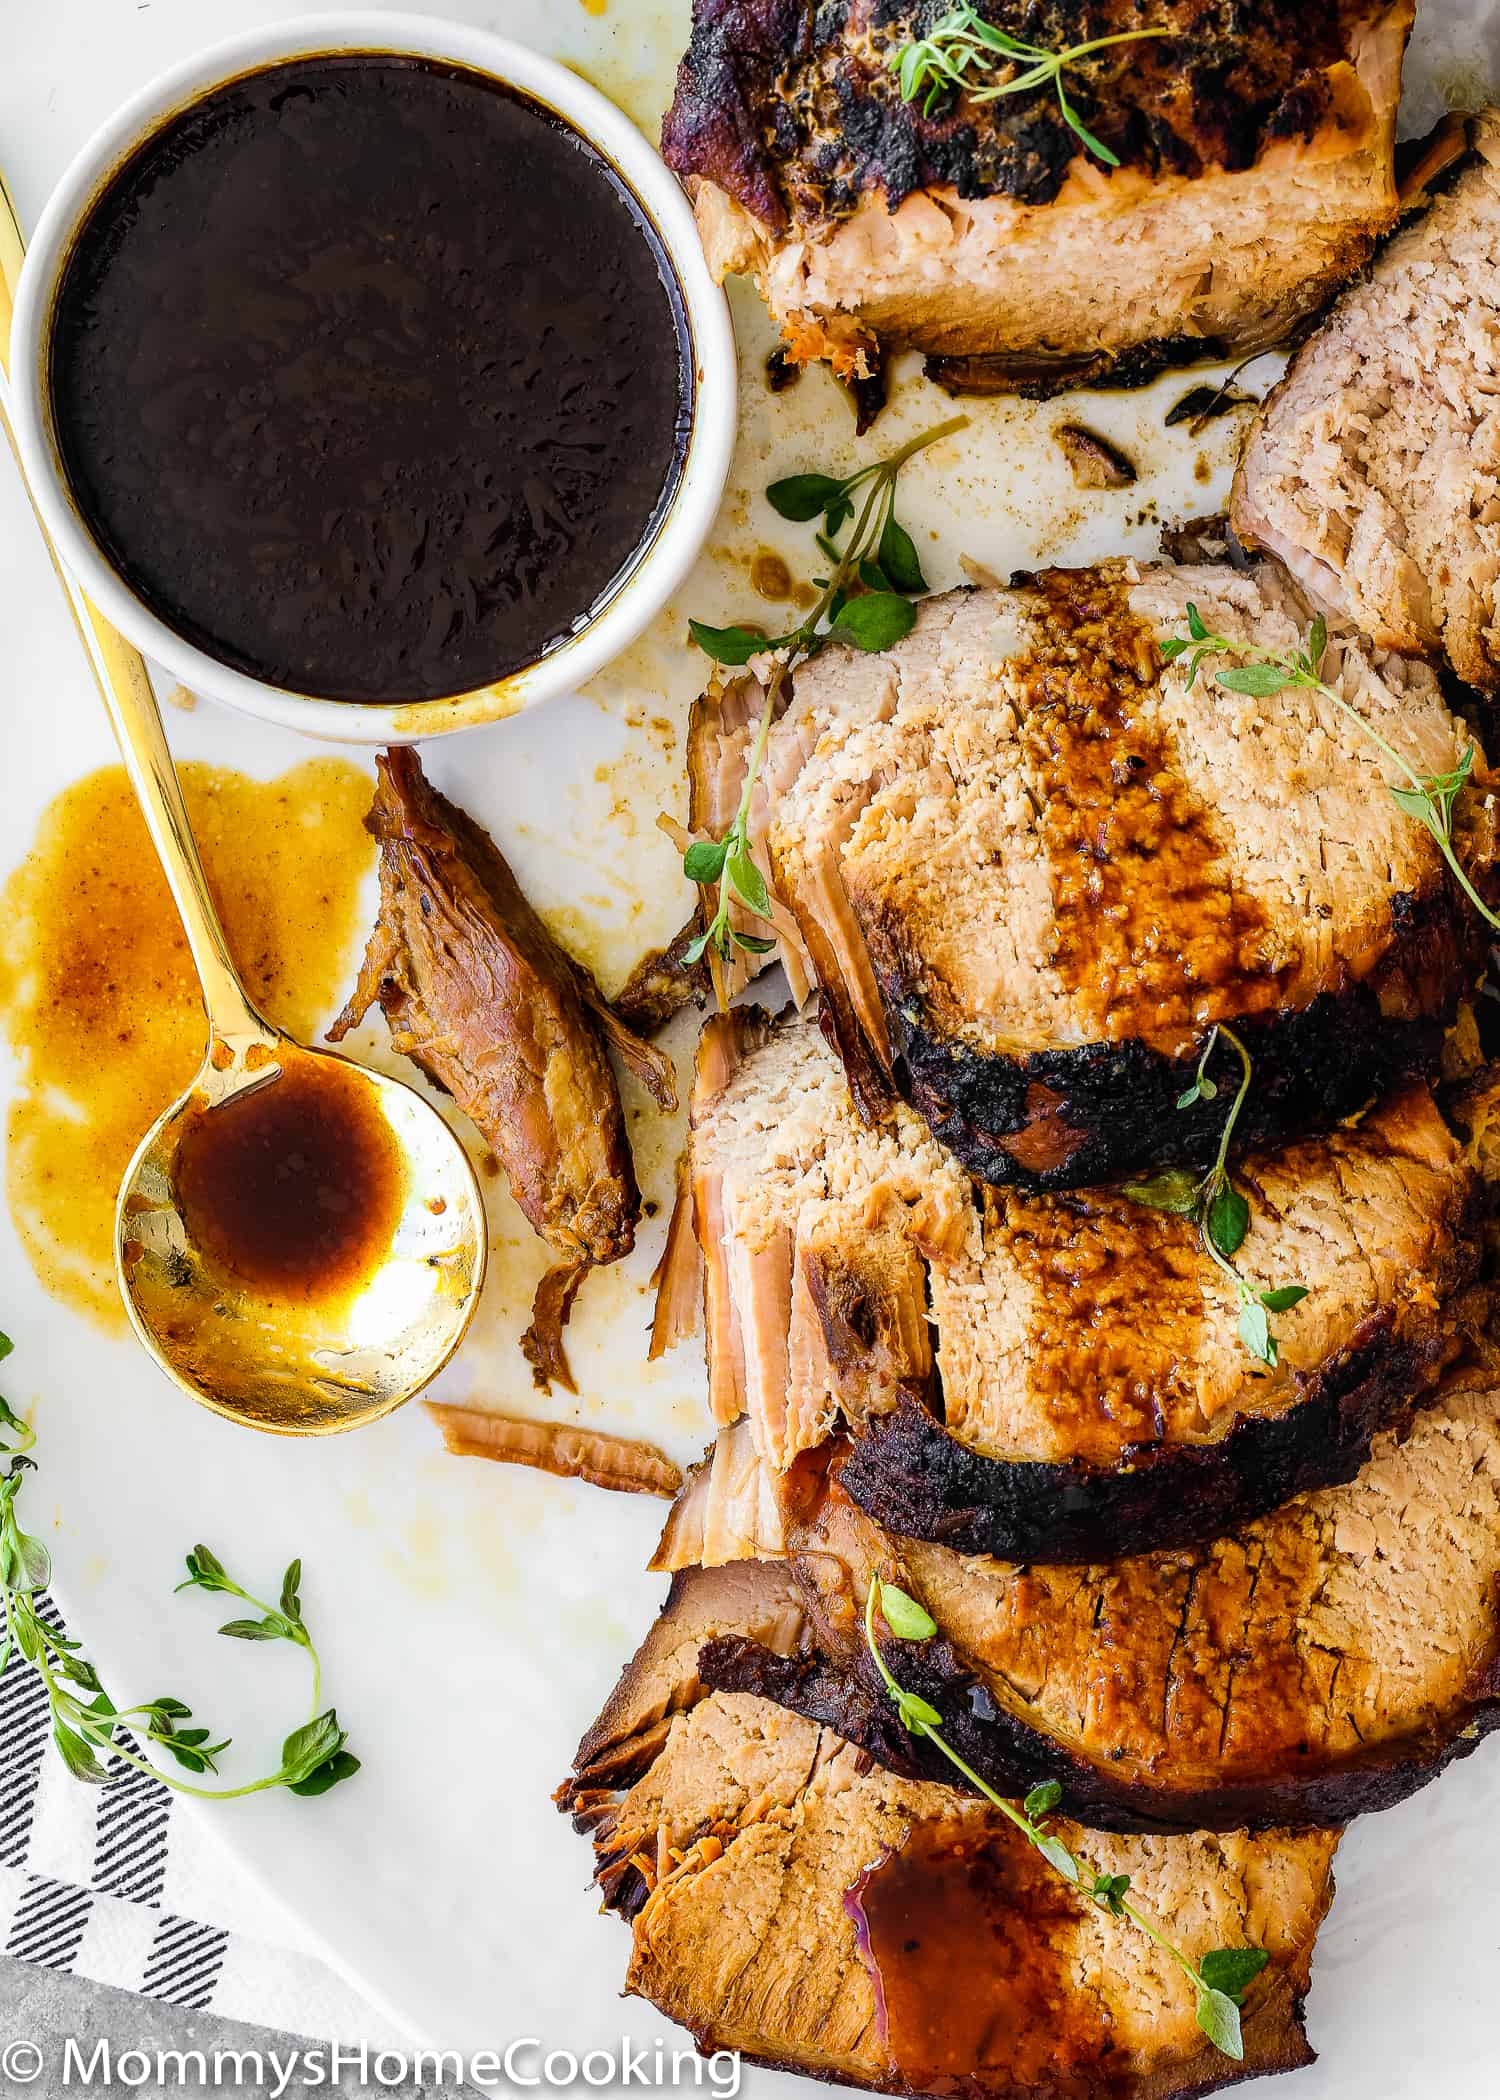 This Slow Cooker Honey Balsamic Pork Loin is tender, juicy and fall-apart delicious! Smothered in a rich honey balsamic sauce, this pork loin is easy for weeknight dinner yet fancy, elegant and impressive enough for company. https://mommyshomecooking.com